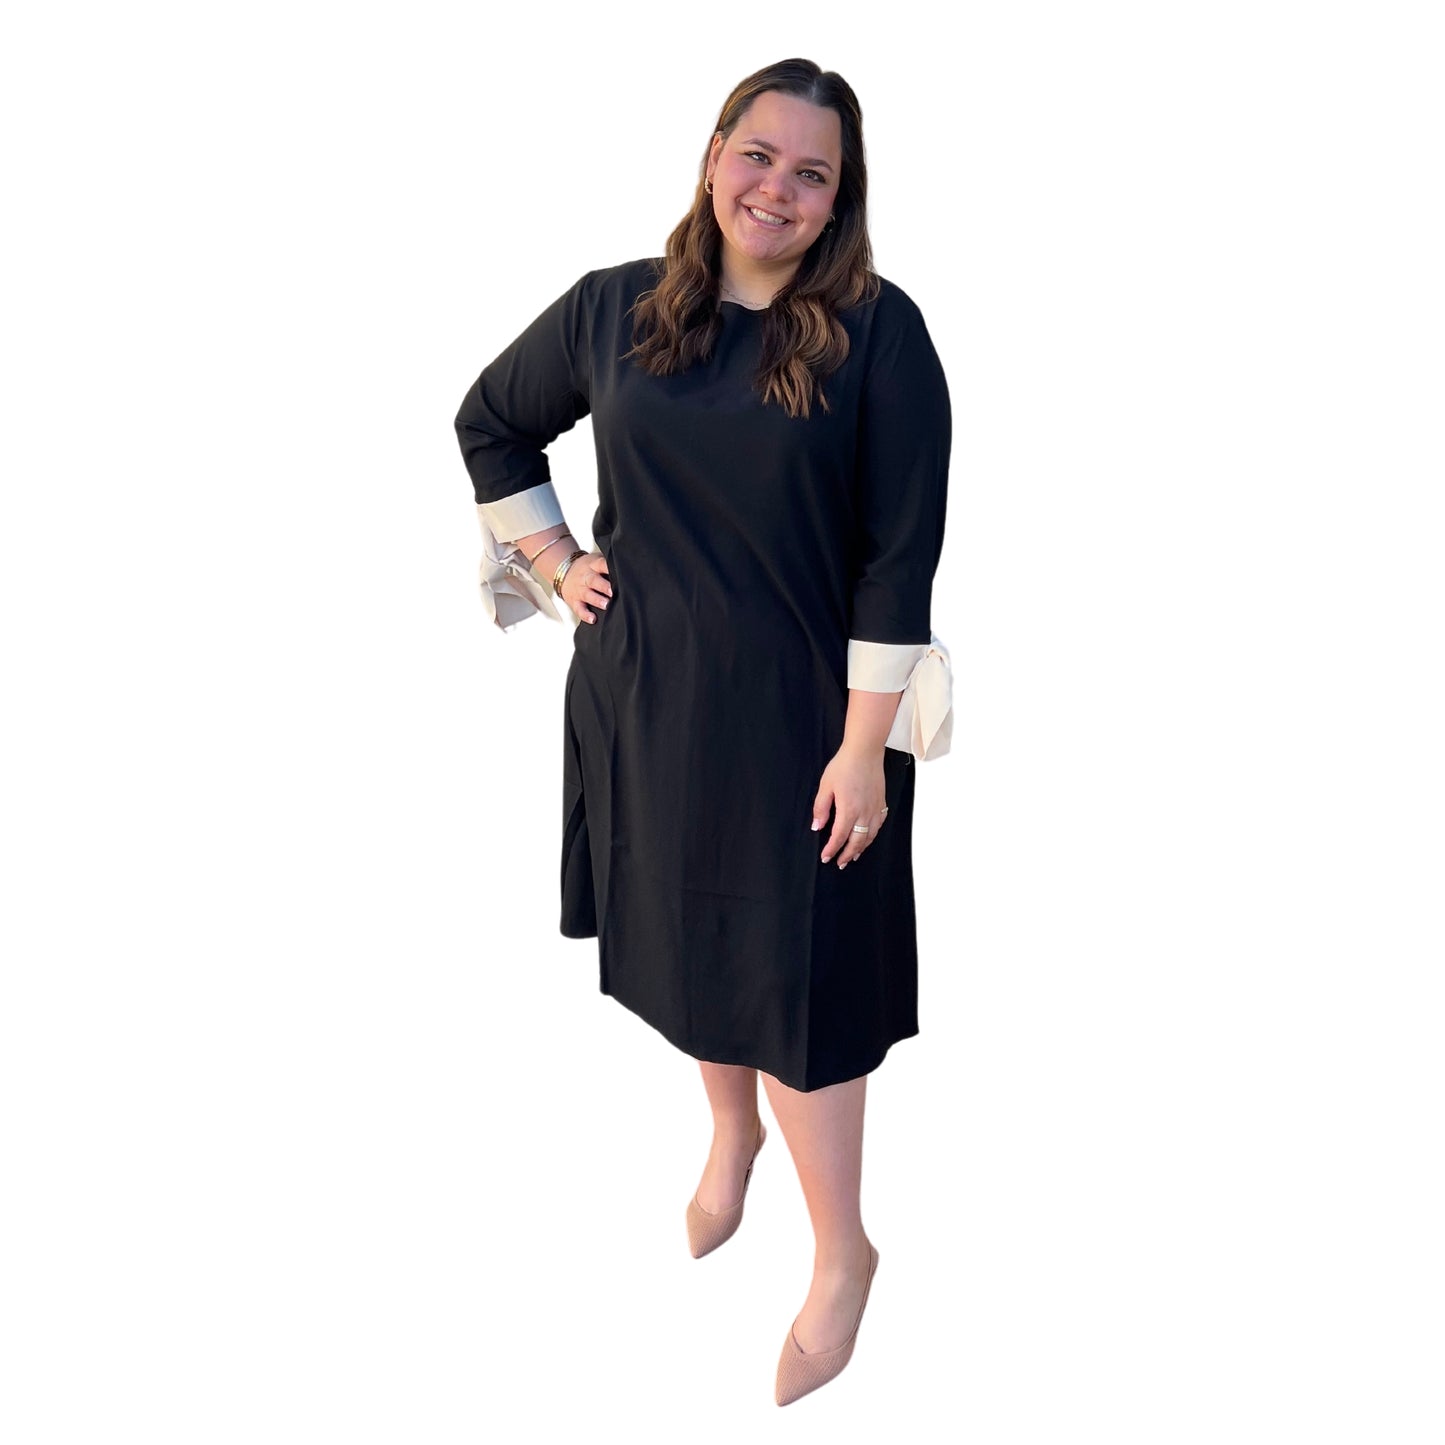 plus size modest dress with cuff bows